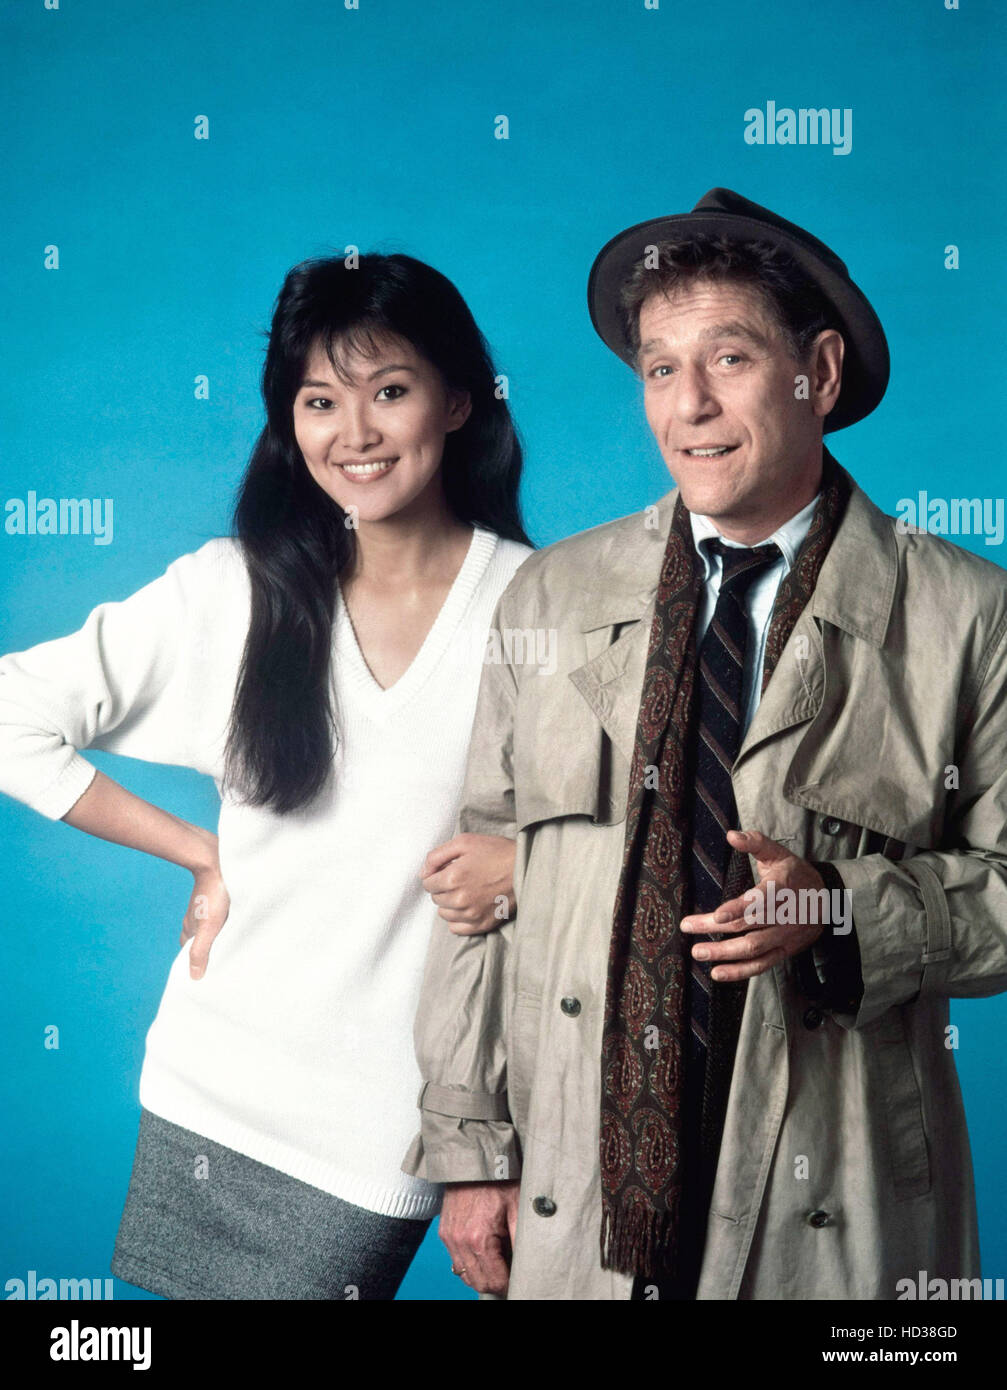 MURPHY'S LAW, from left: Maggie Han, George Segal, 1988-1989, © ABC/courtesy Everett Collection Stock Photo